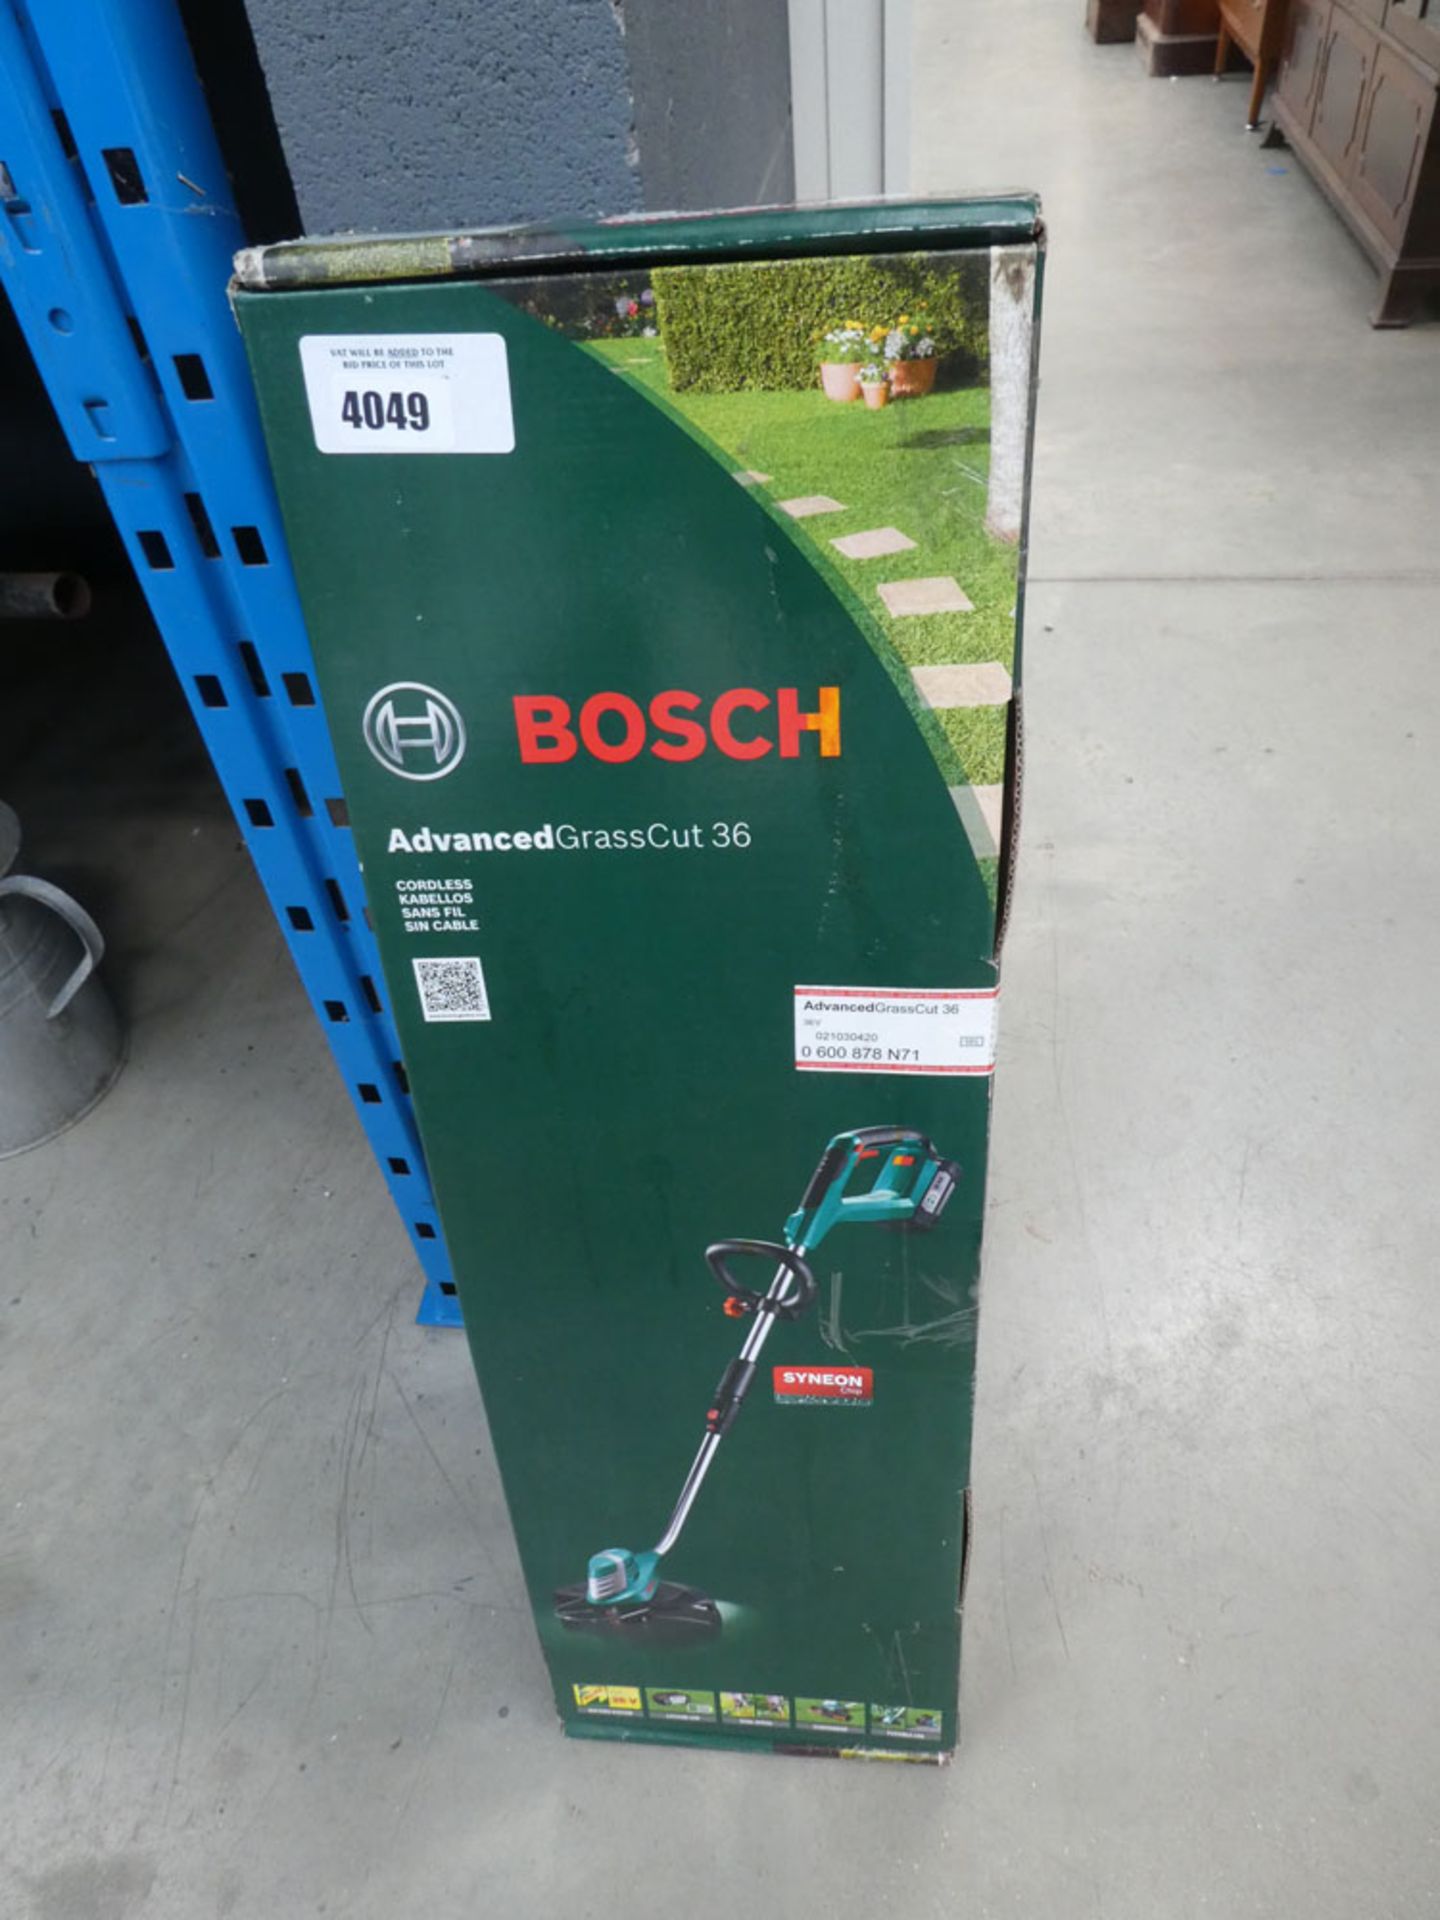 Boxed Bosch cordless strimmer